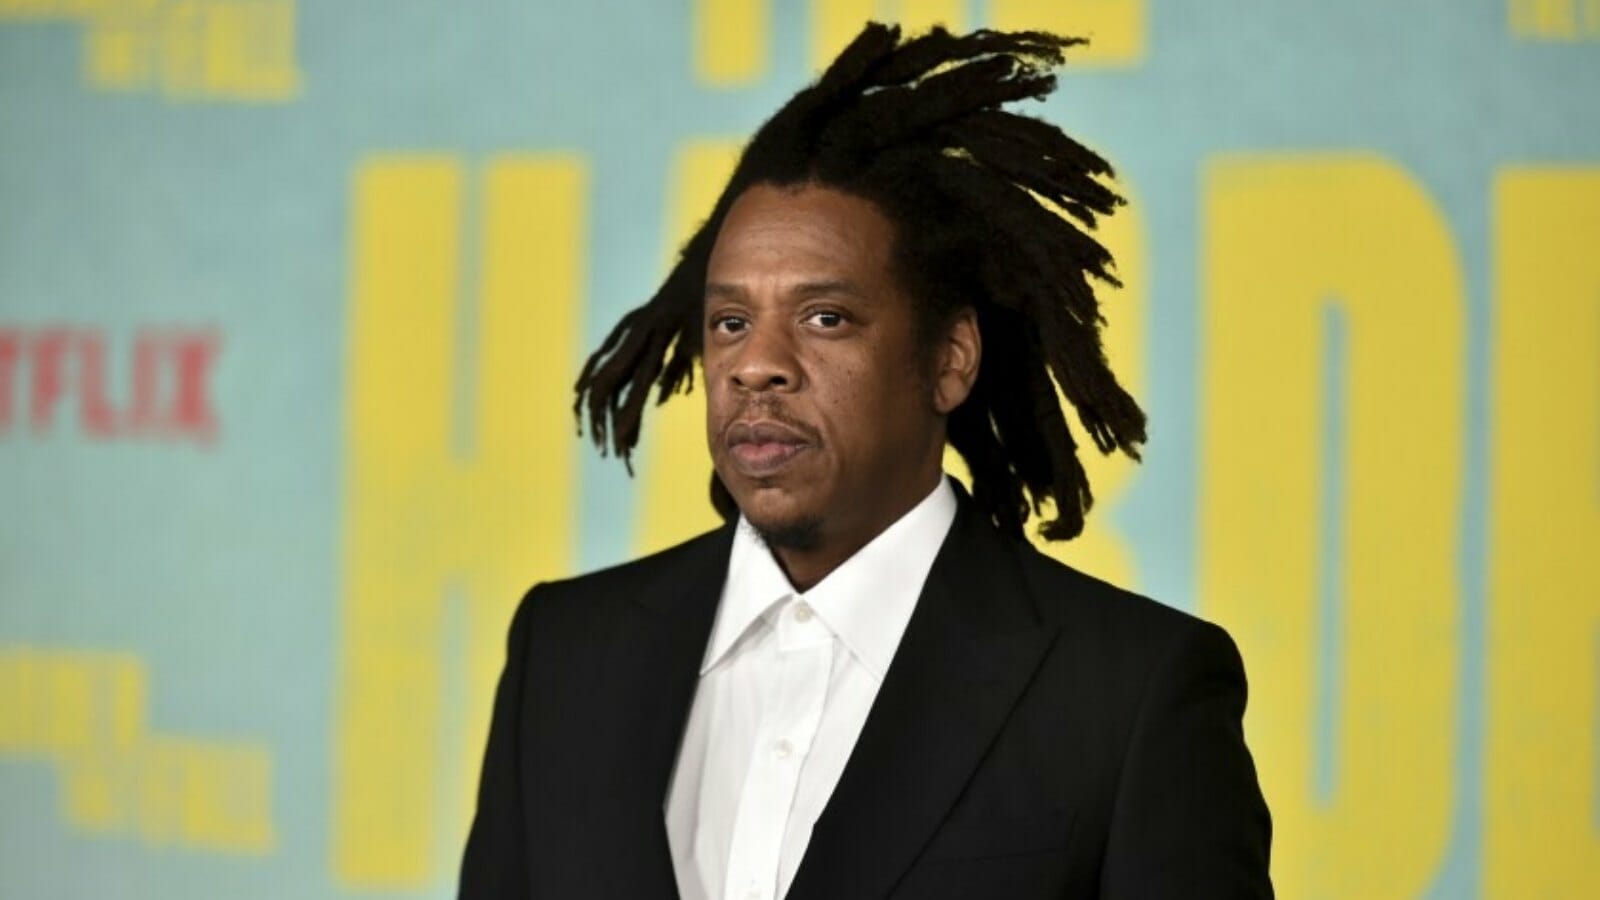 Jay-Z Requested To Move Chateau Oscar Party By Black Clergy Leaders